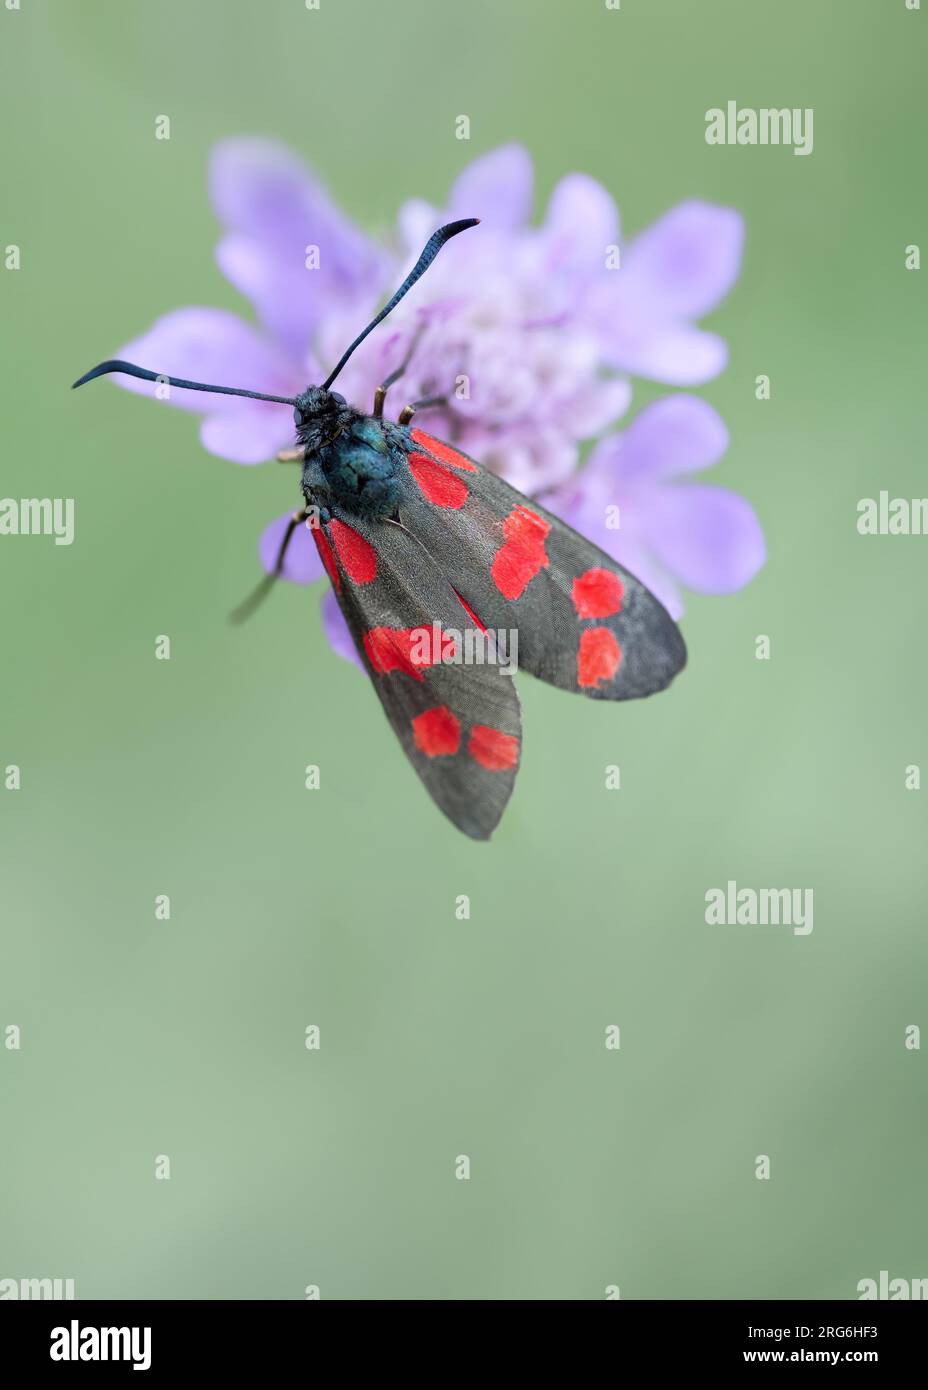 A macro of a moth, the narrow-bordered five-spot burnet ( Zygaena Lonicerae ) on a purple flower,pastel green background, copy space, negative space Stock Photo